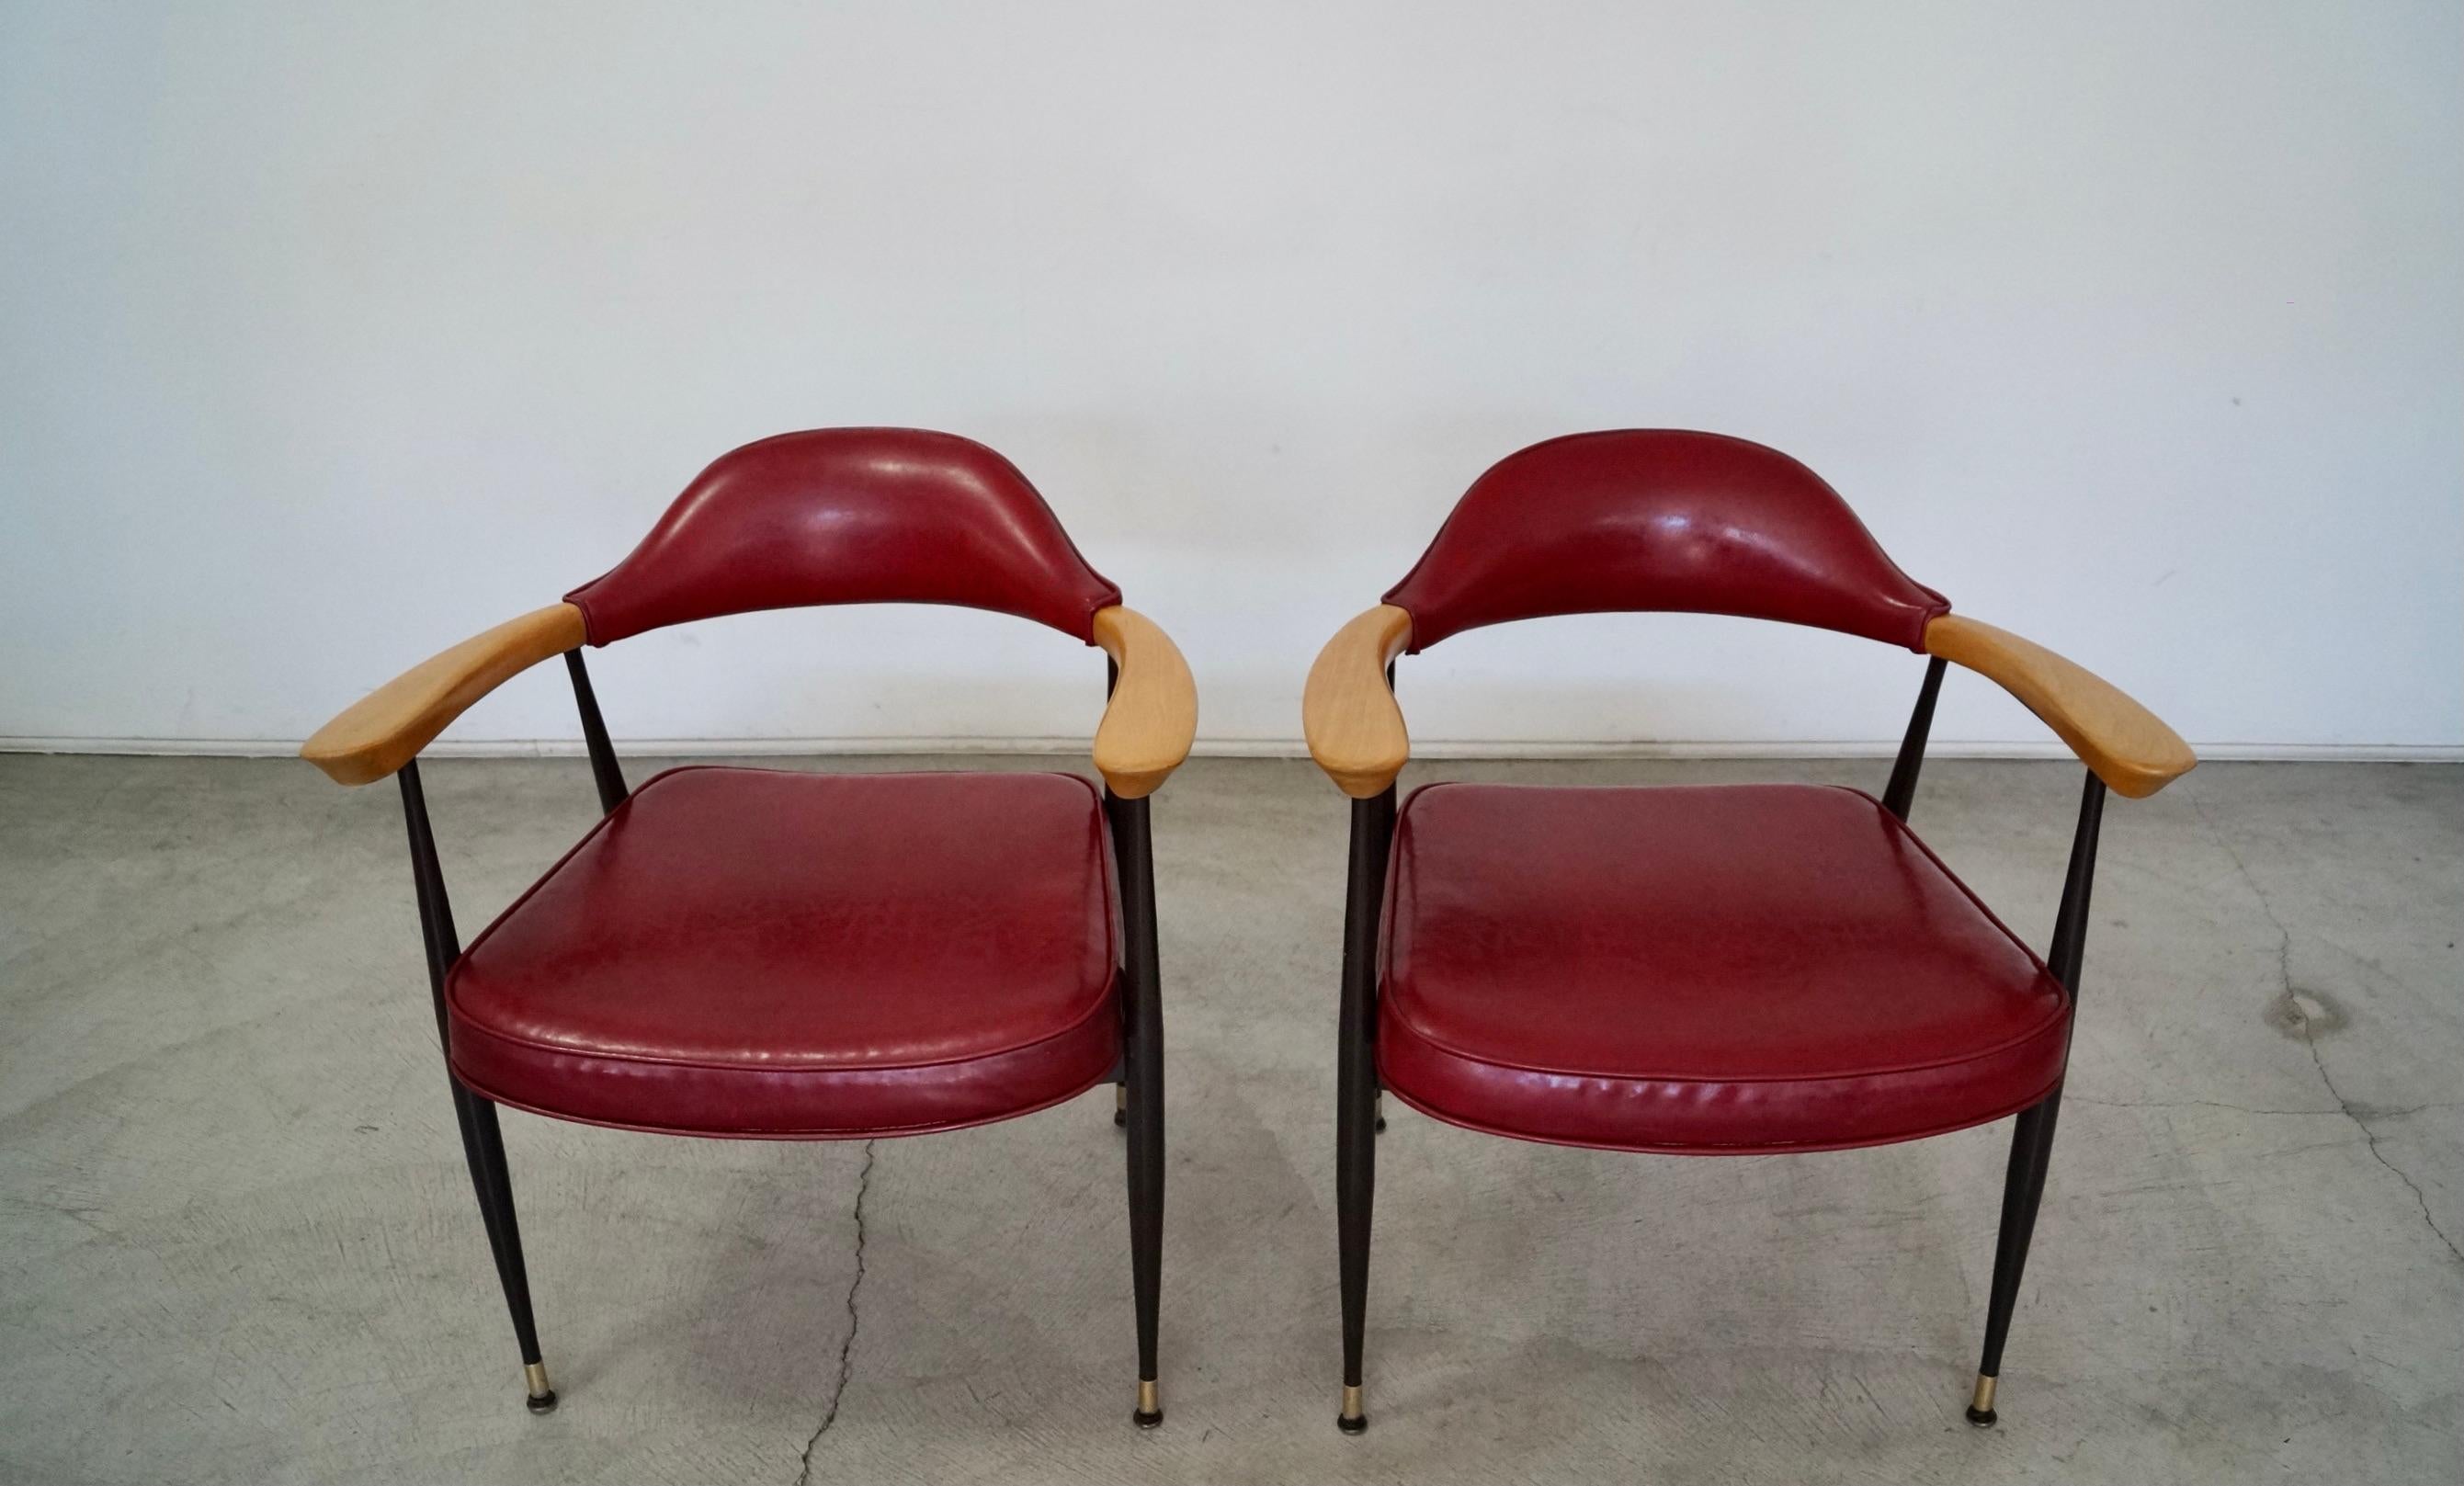 Vintage Mid-century Modern armchairs for sale. Manufactured in 1977 by Lion Brand, and still have the original maker's mark underneath. They have the original red vinyl in excellent vintage condition. The solid oak arms have been refinished in